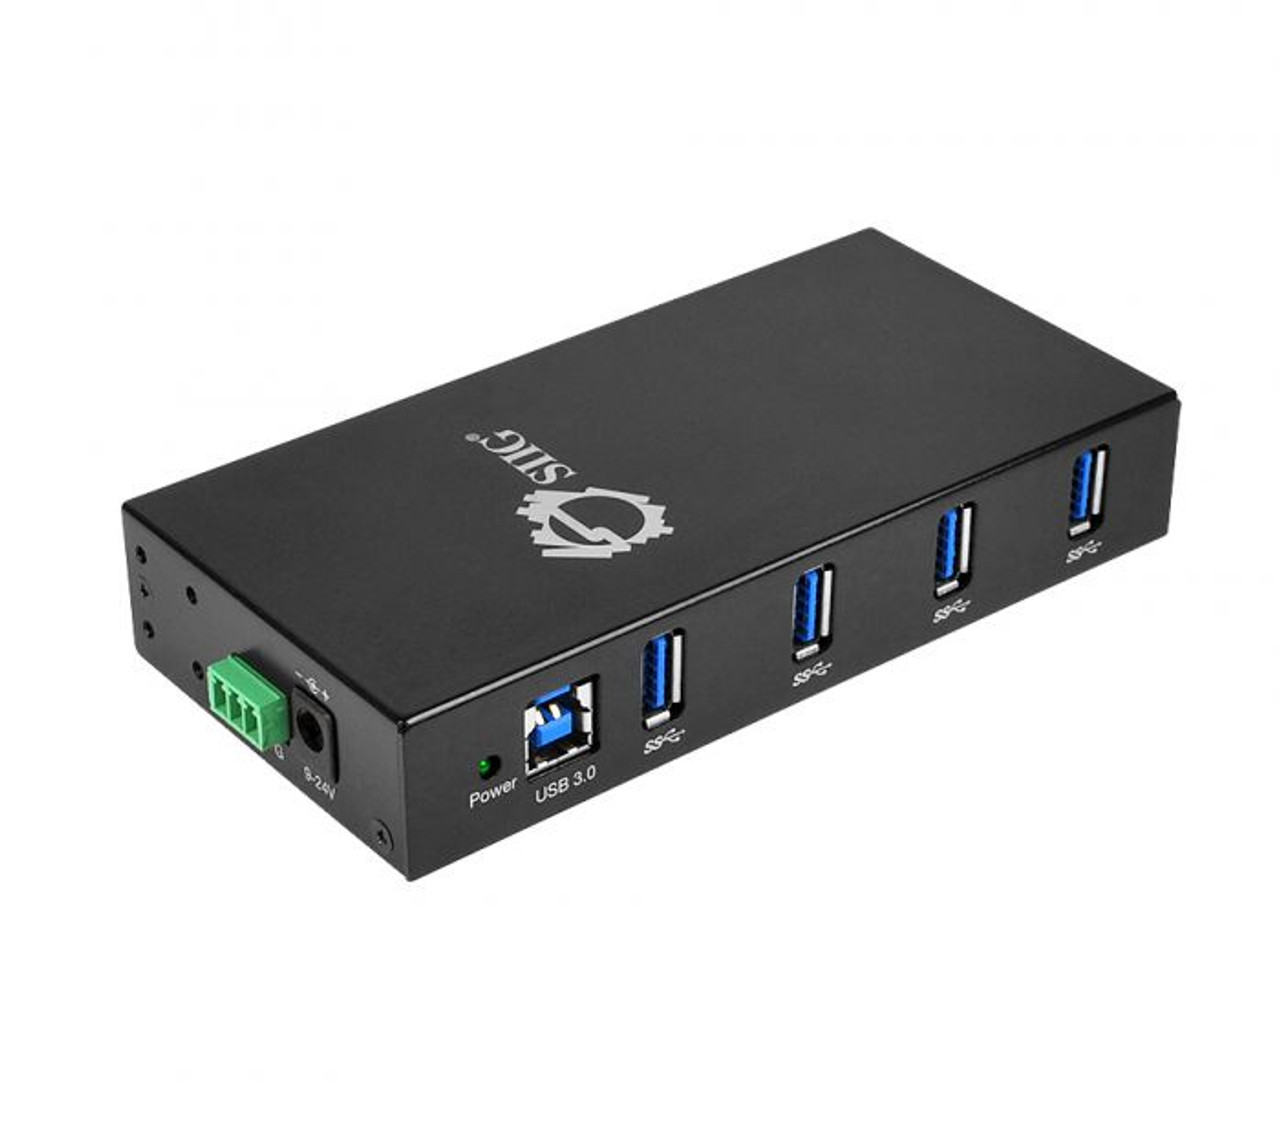 SIIGs 4-Port Industrial USB 3.0 Hub with 15KV ESD Protection adds 4 USB 3.0 ports to your system from a single USB port, enabling additional USB device connections.  It delivers SuperSpeed USB data transfer rate up to 5Gb/s, offers built-in 15KV